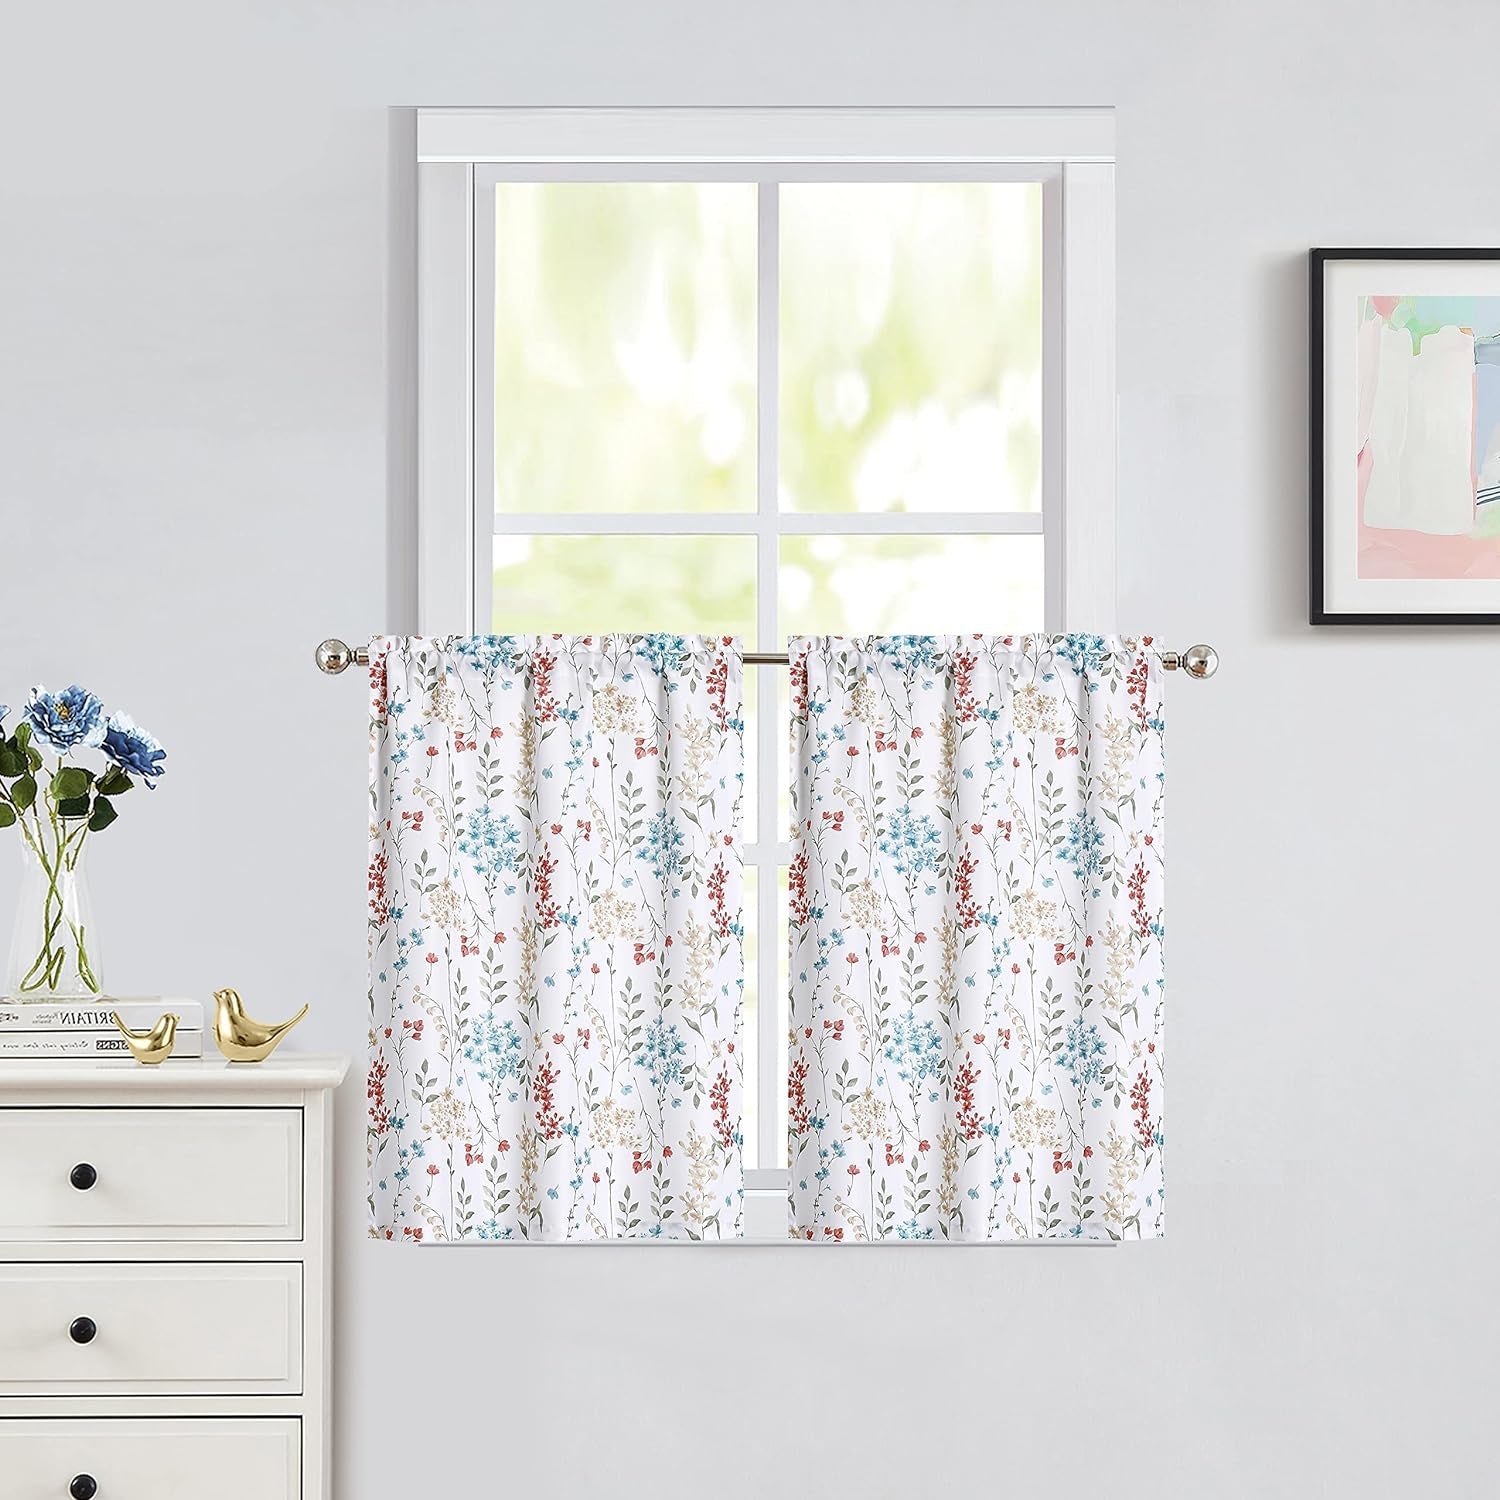 Blue Colorful Floral Tie up Kitchen Curtain Valance Botanical Flower Leaves Print, Farmhouse Rod Pocket Small Curtains for Kitchen Cafe Bathroom Window Treatment, 56" X 15", Watercolor, 1 Panel